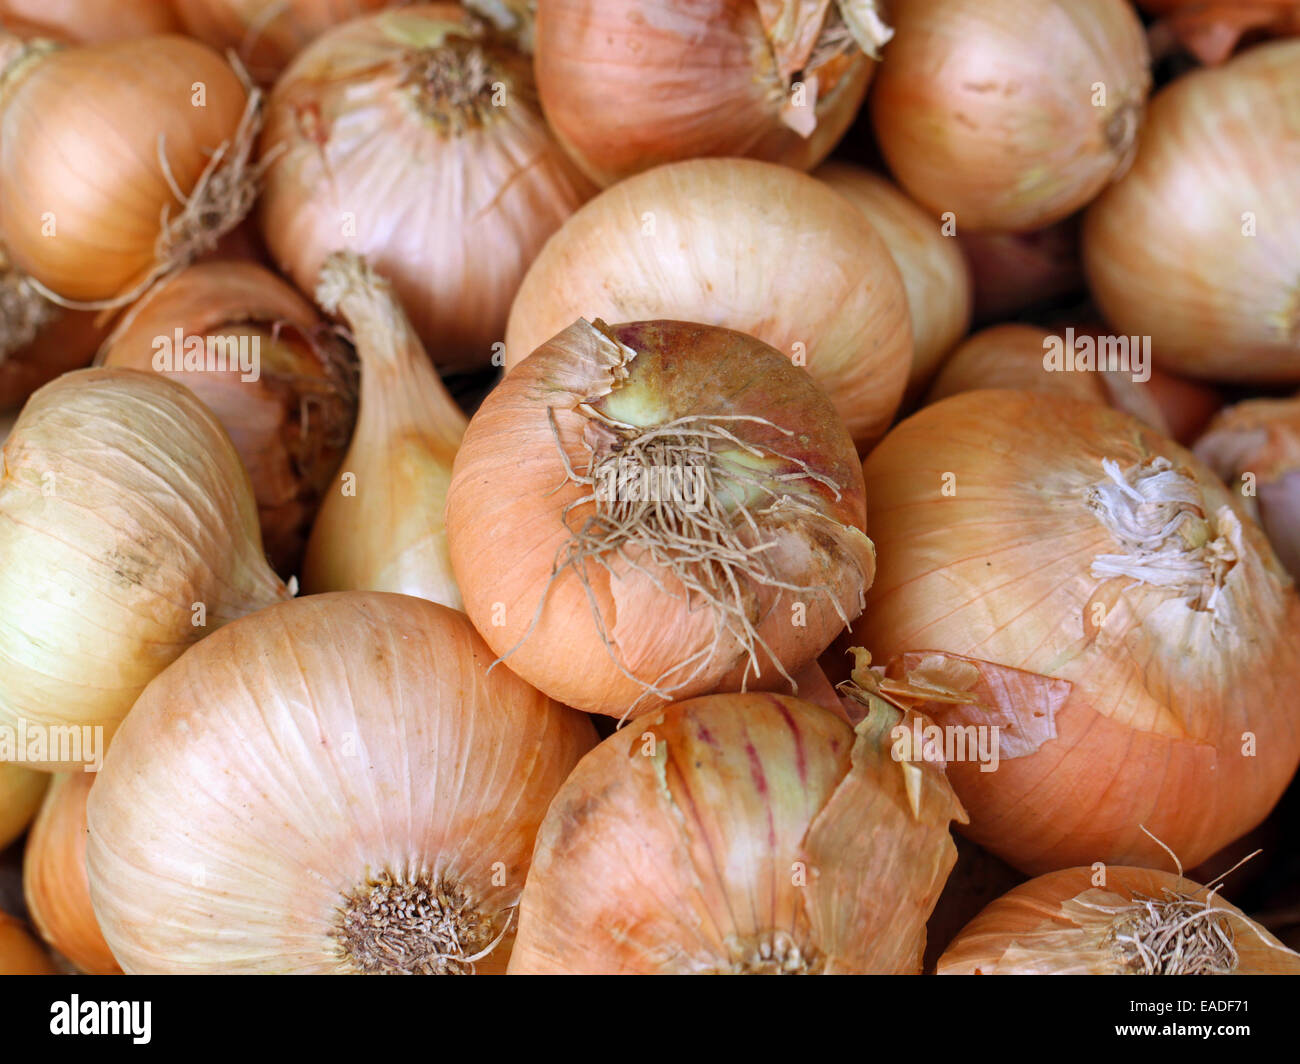 texture of onions a photographed close up Stock Photo